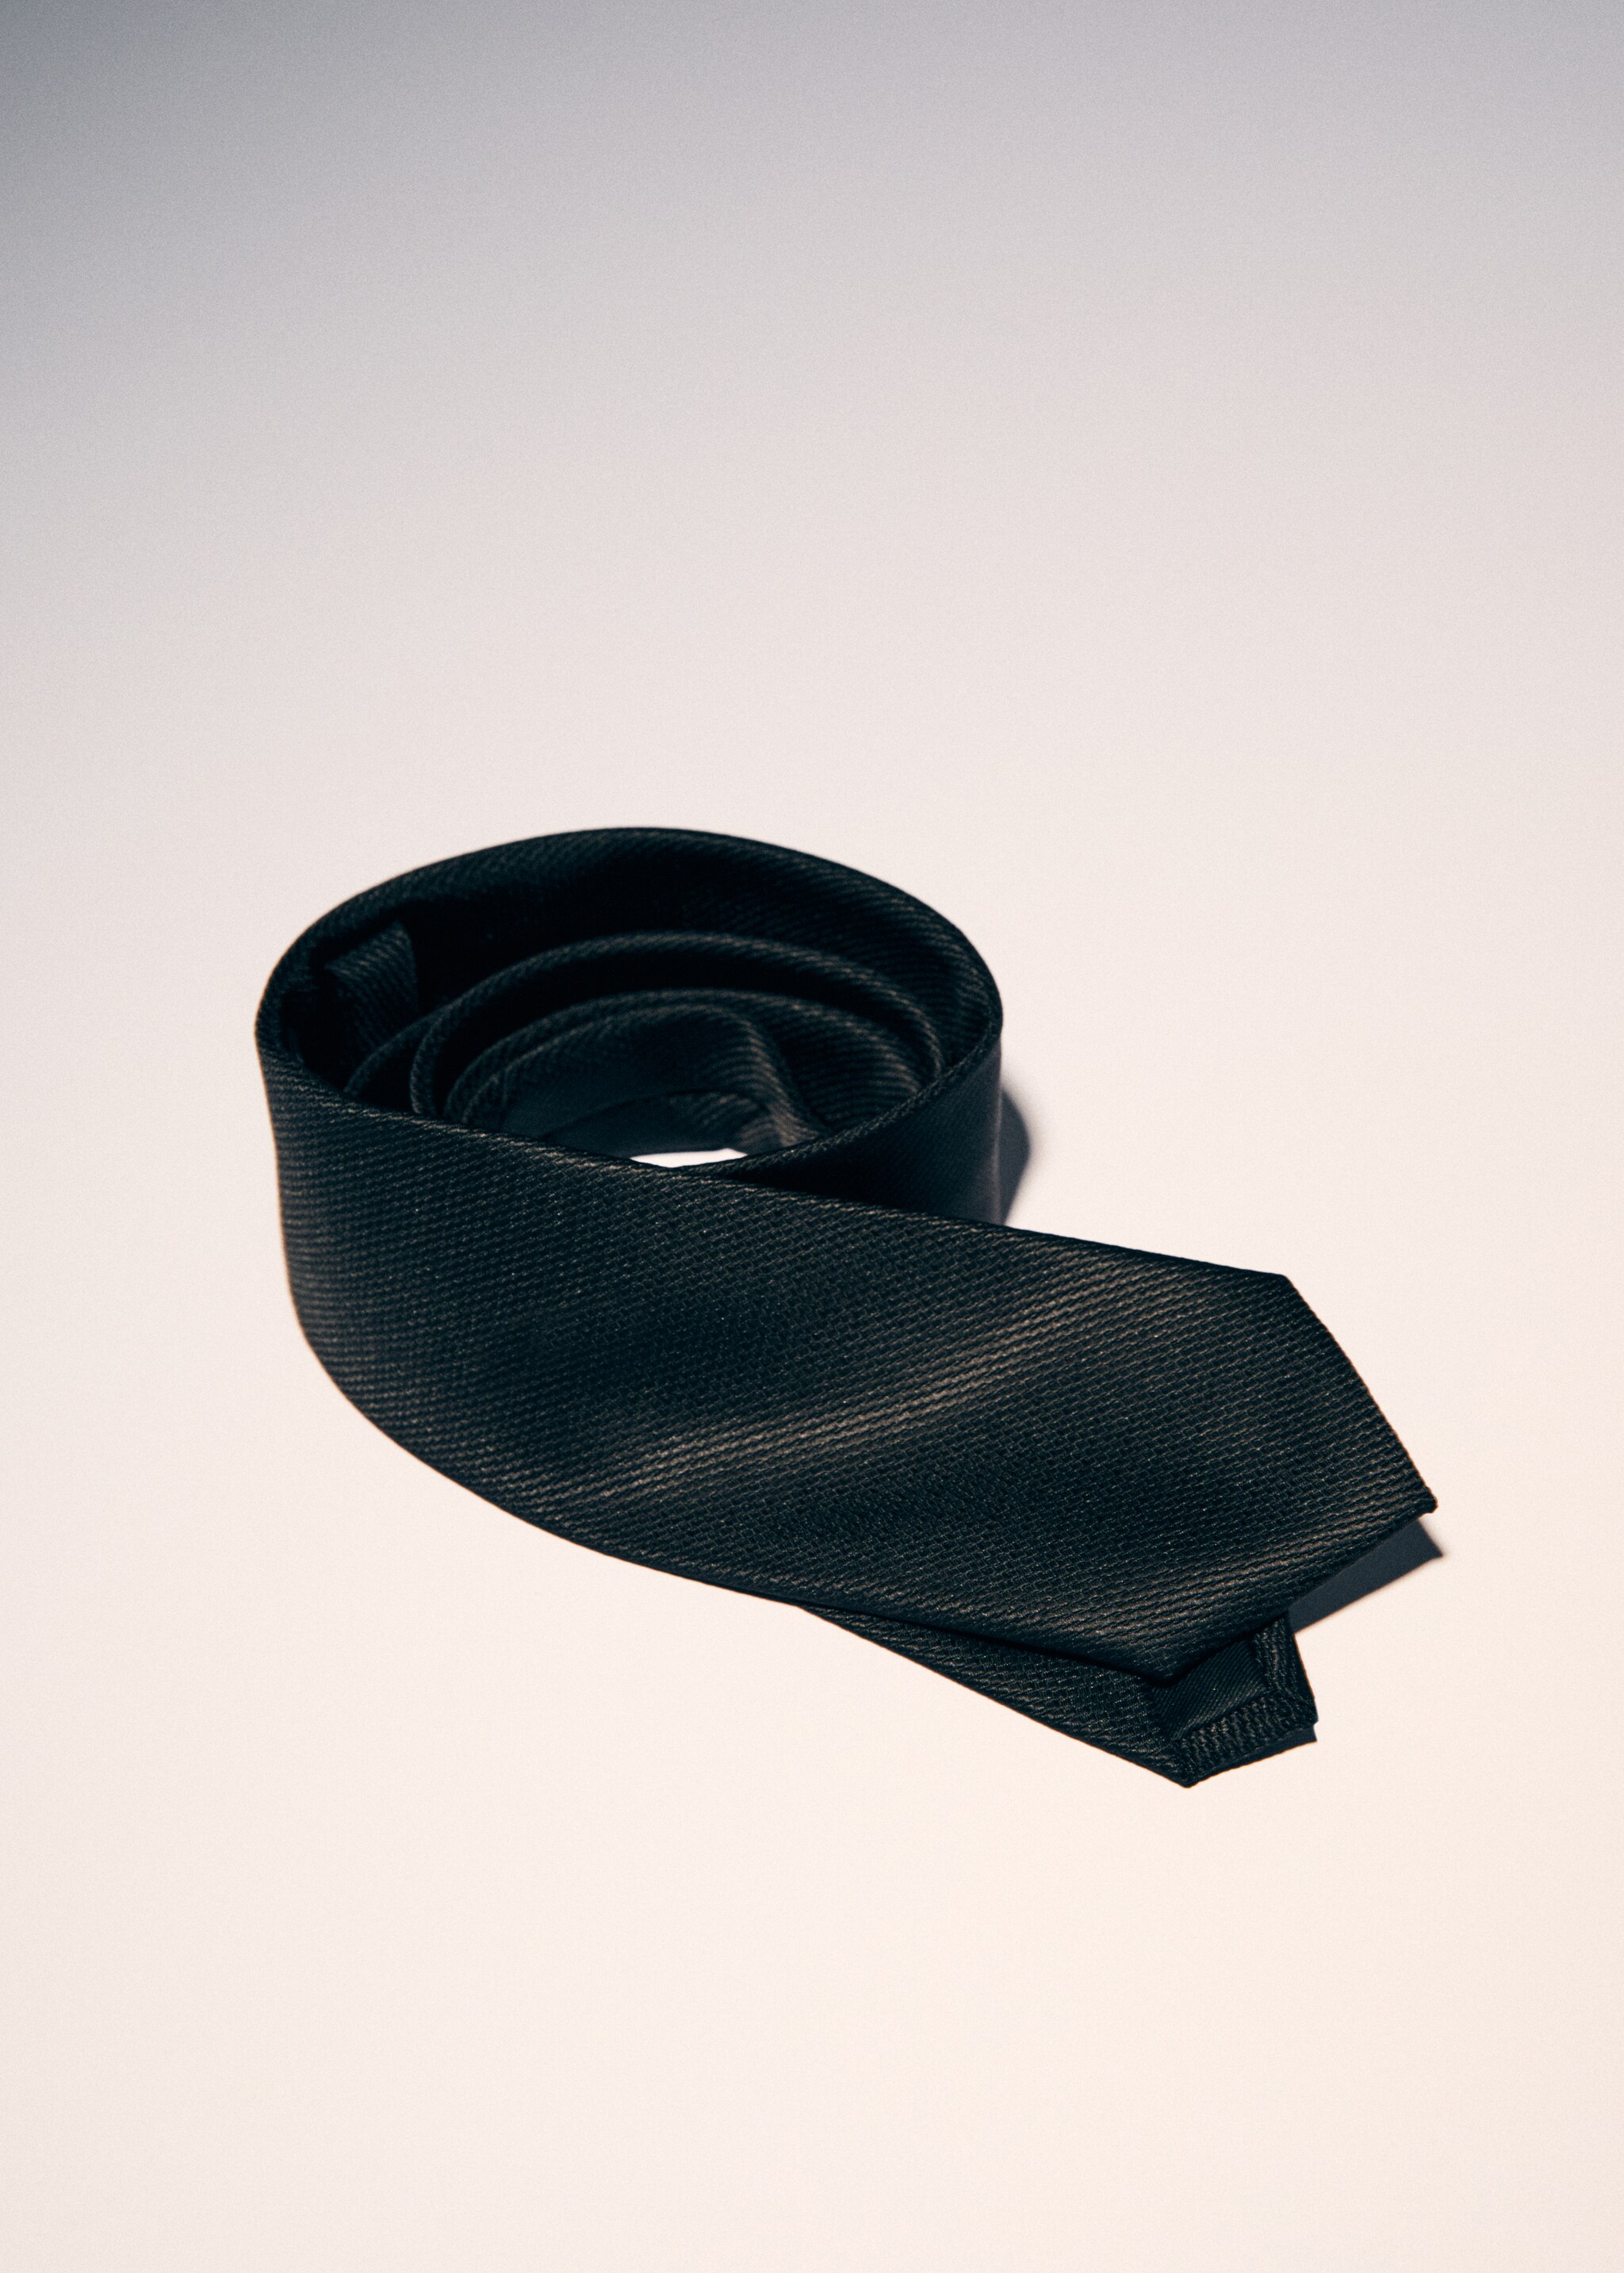 Crease-resistant structured tie - Details of the article 9